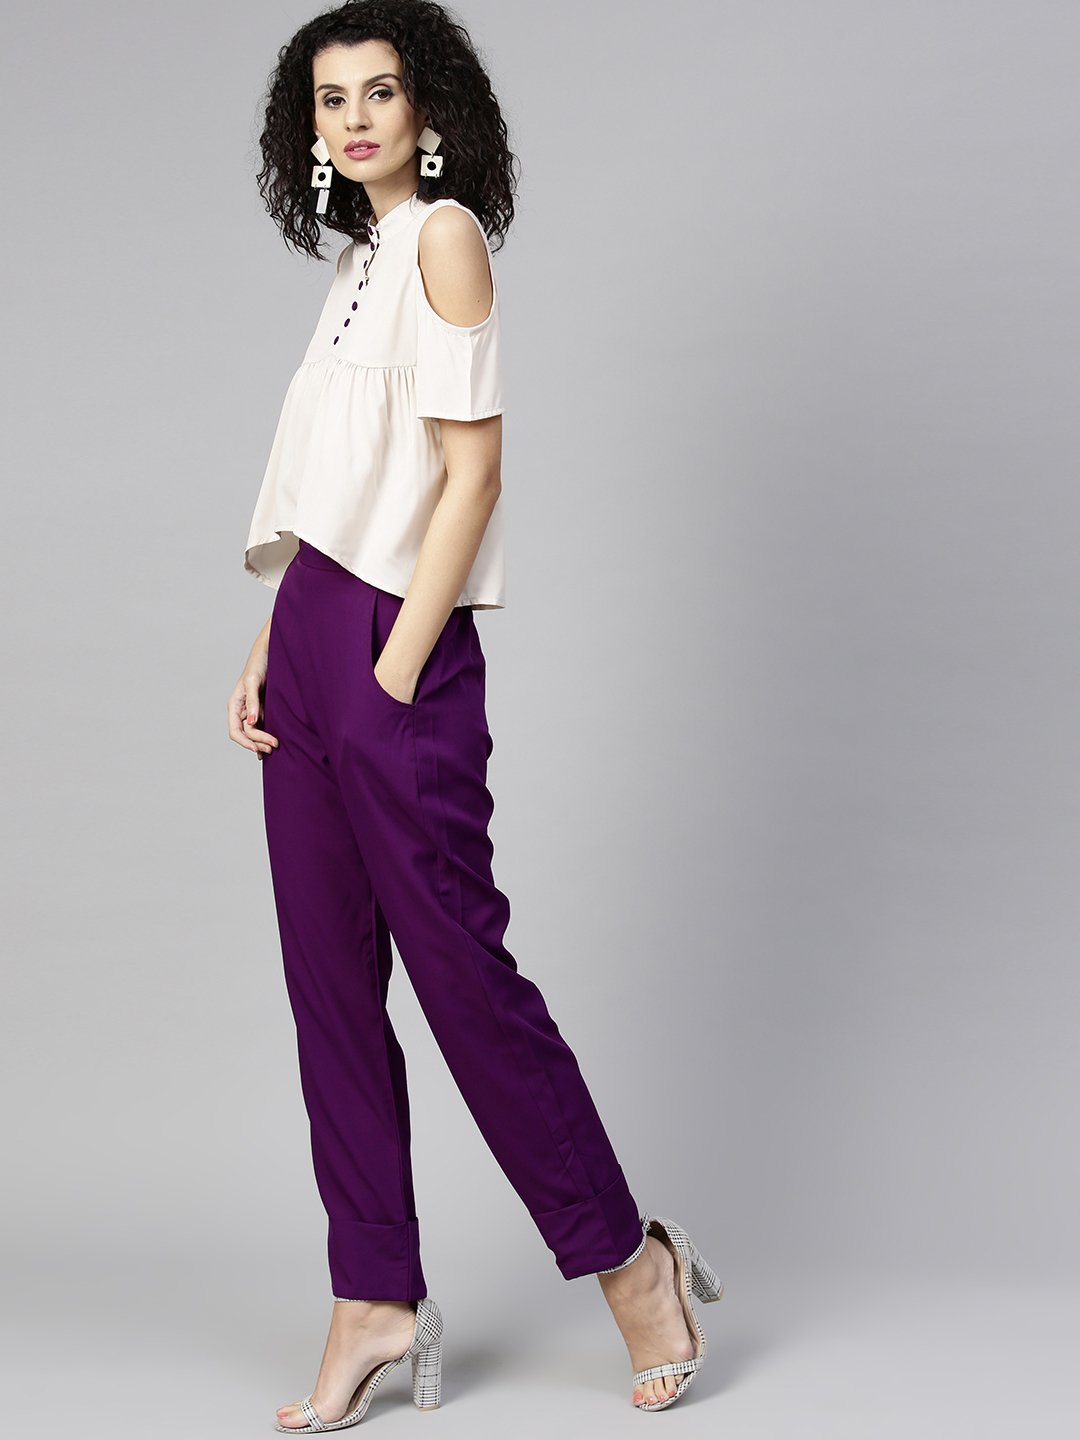 Women's Off-White & Purple Solid Top With Trousers - Nayo Clothing